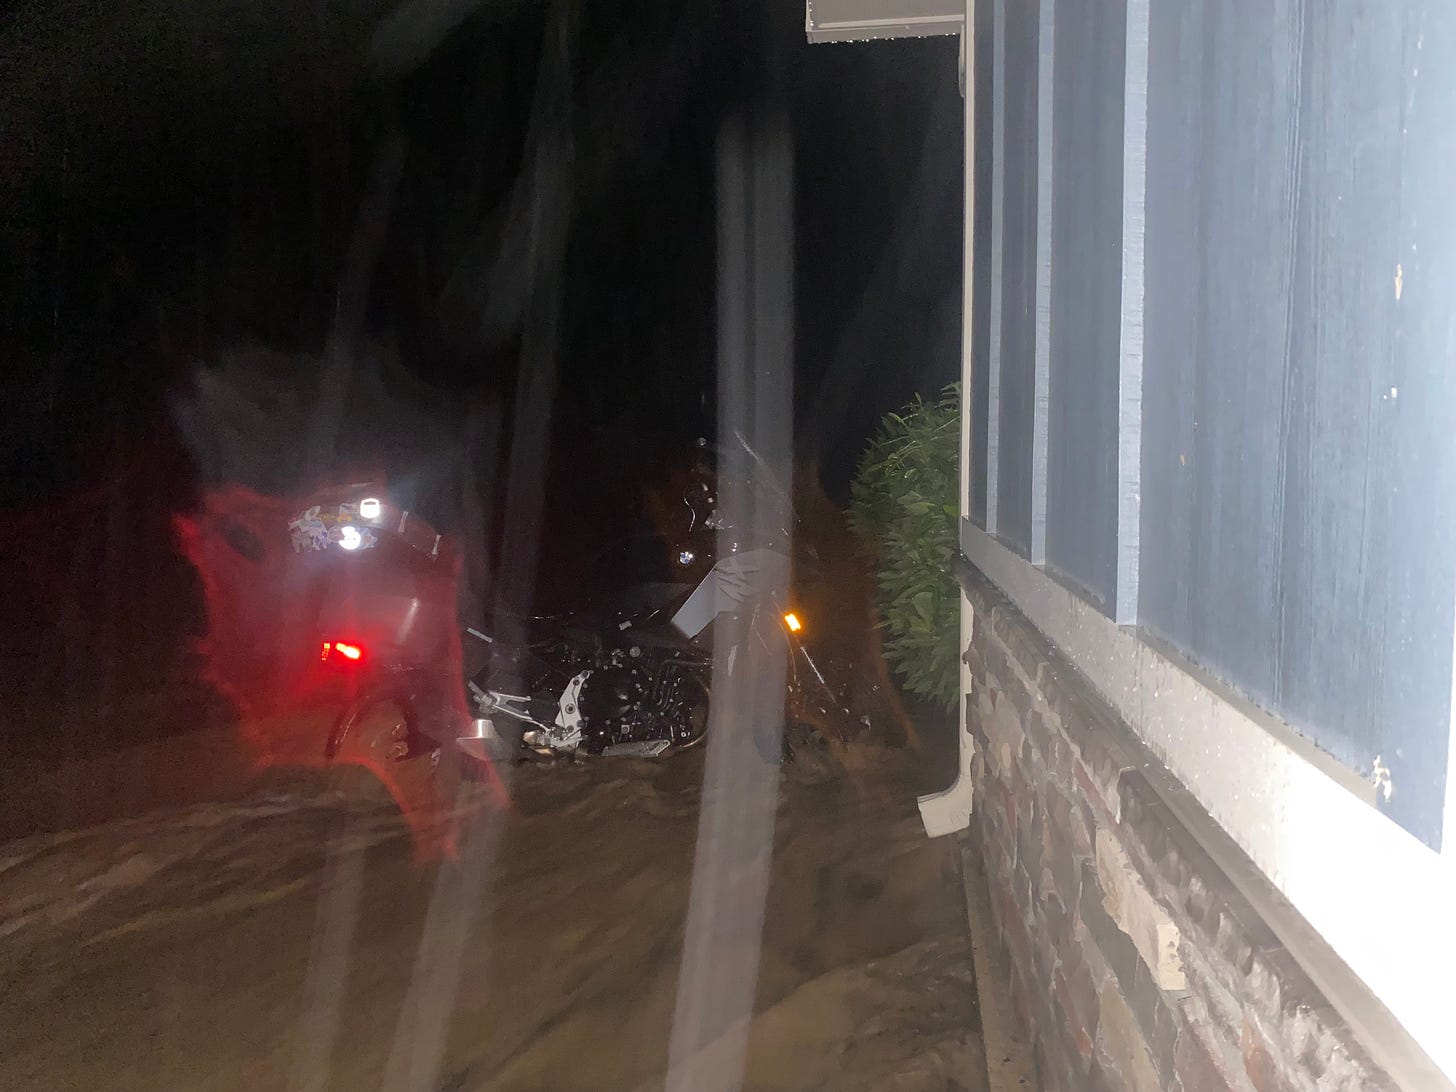 Motorcycle in floodwaters with reflectors responding to phone flash